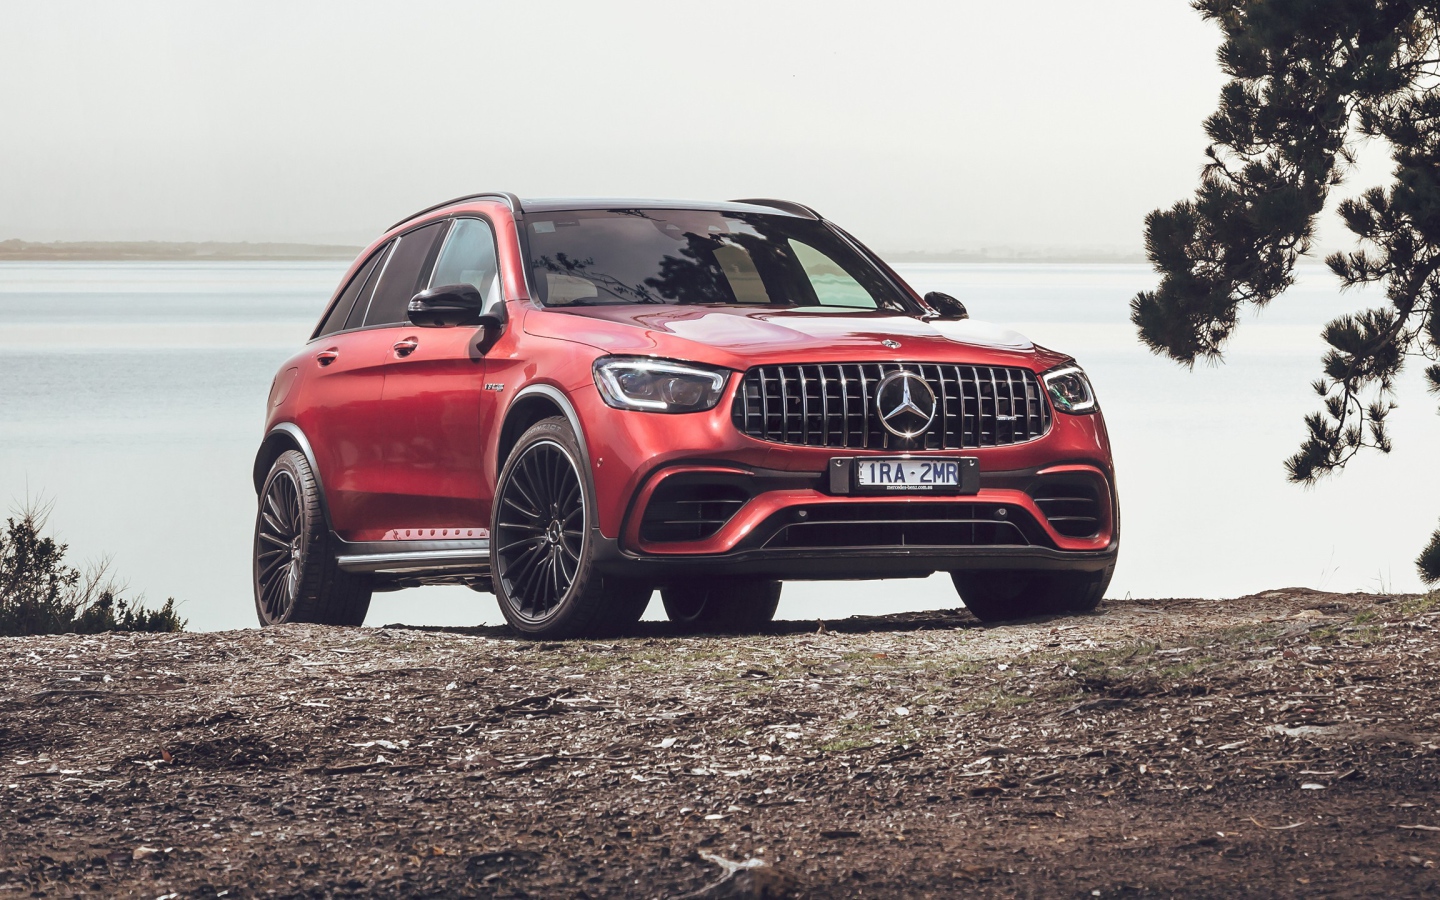 Red Mercedes-AMG GLC 63 S 4MATIC 2020 car near the water